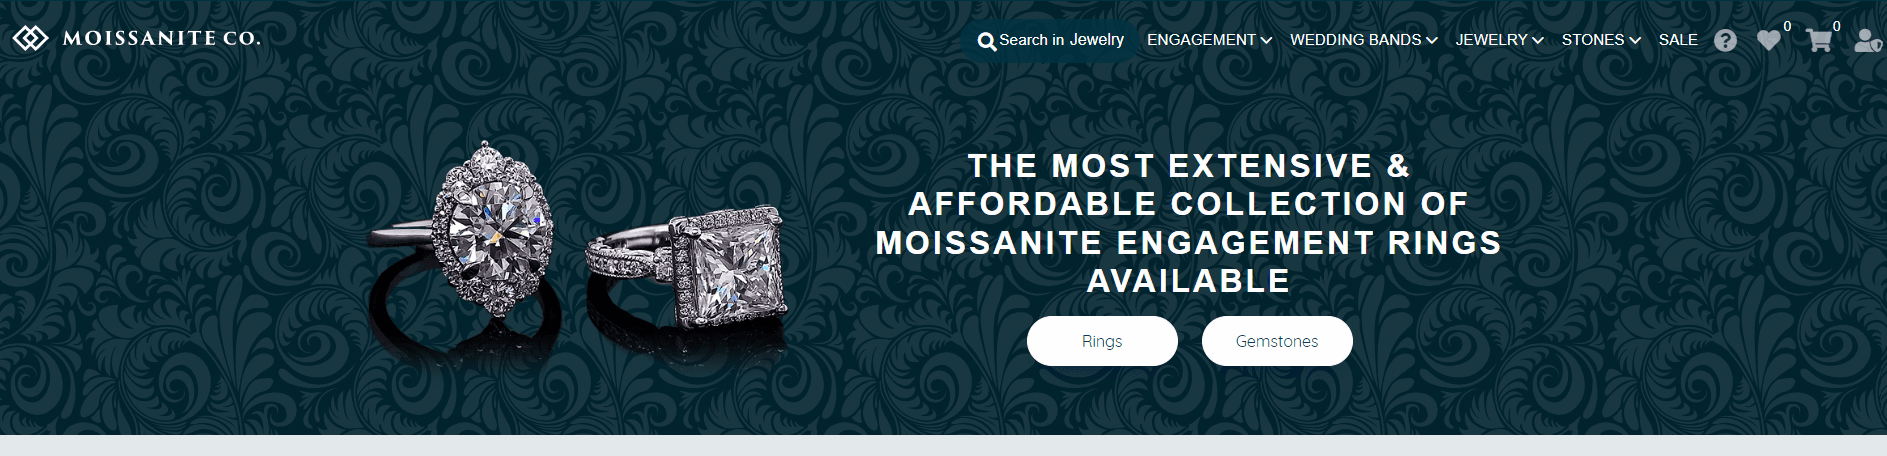 moissanite co home page